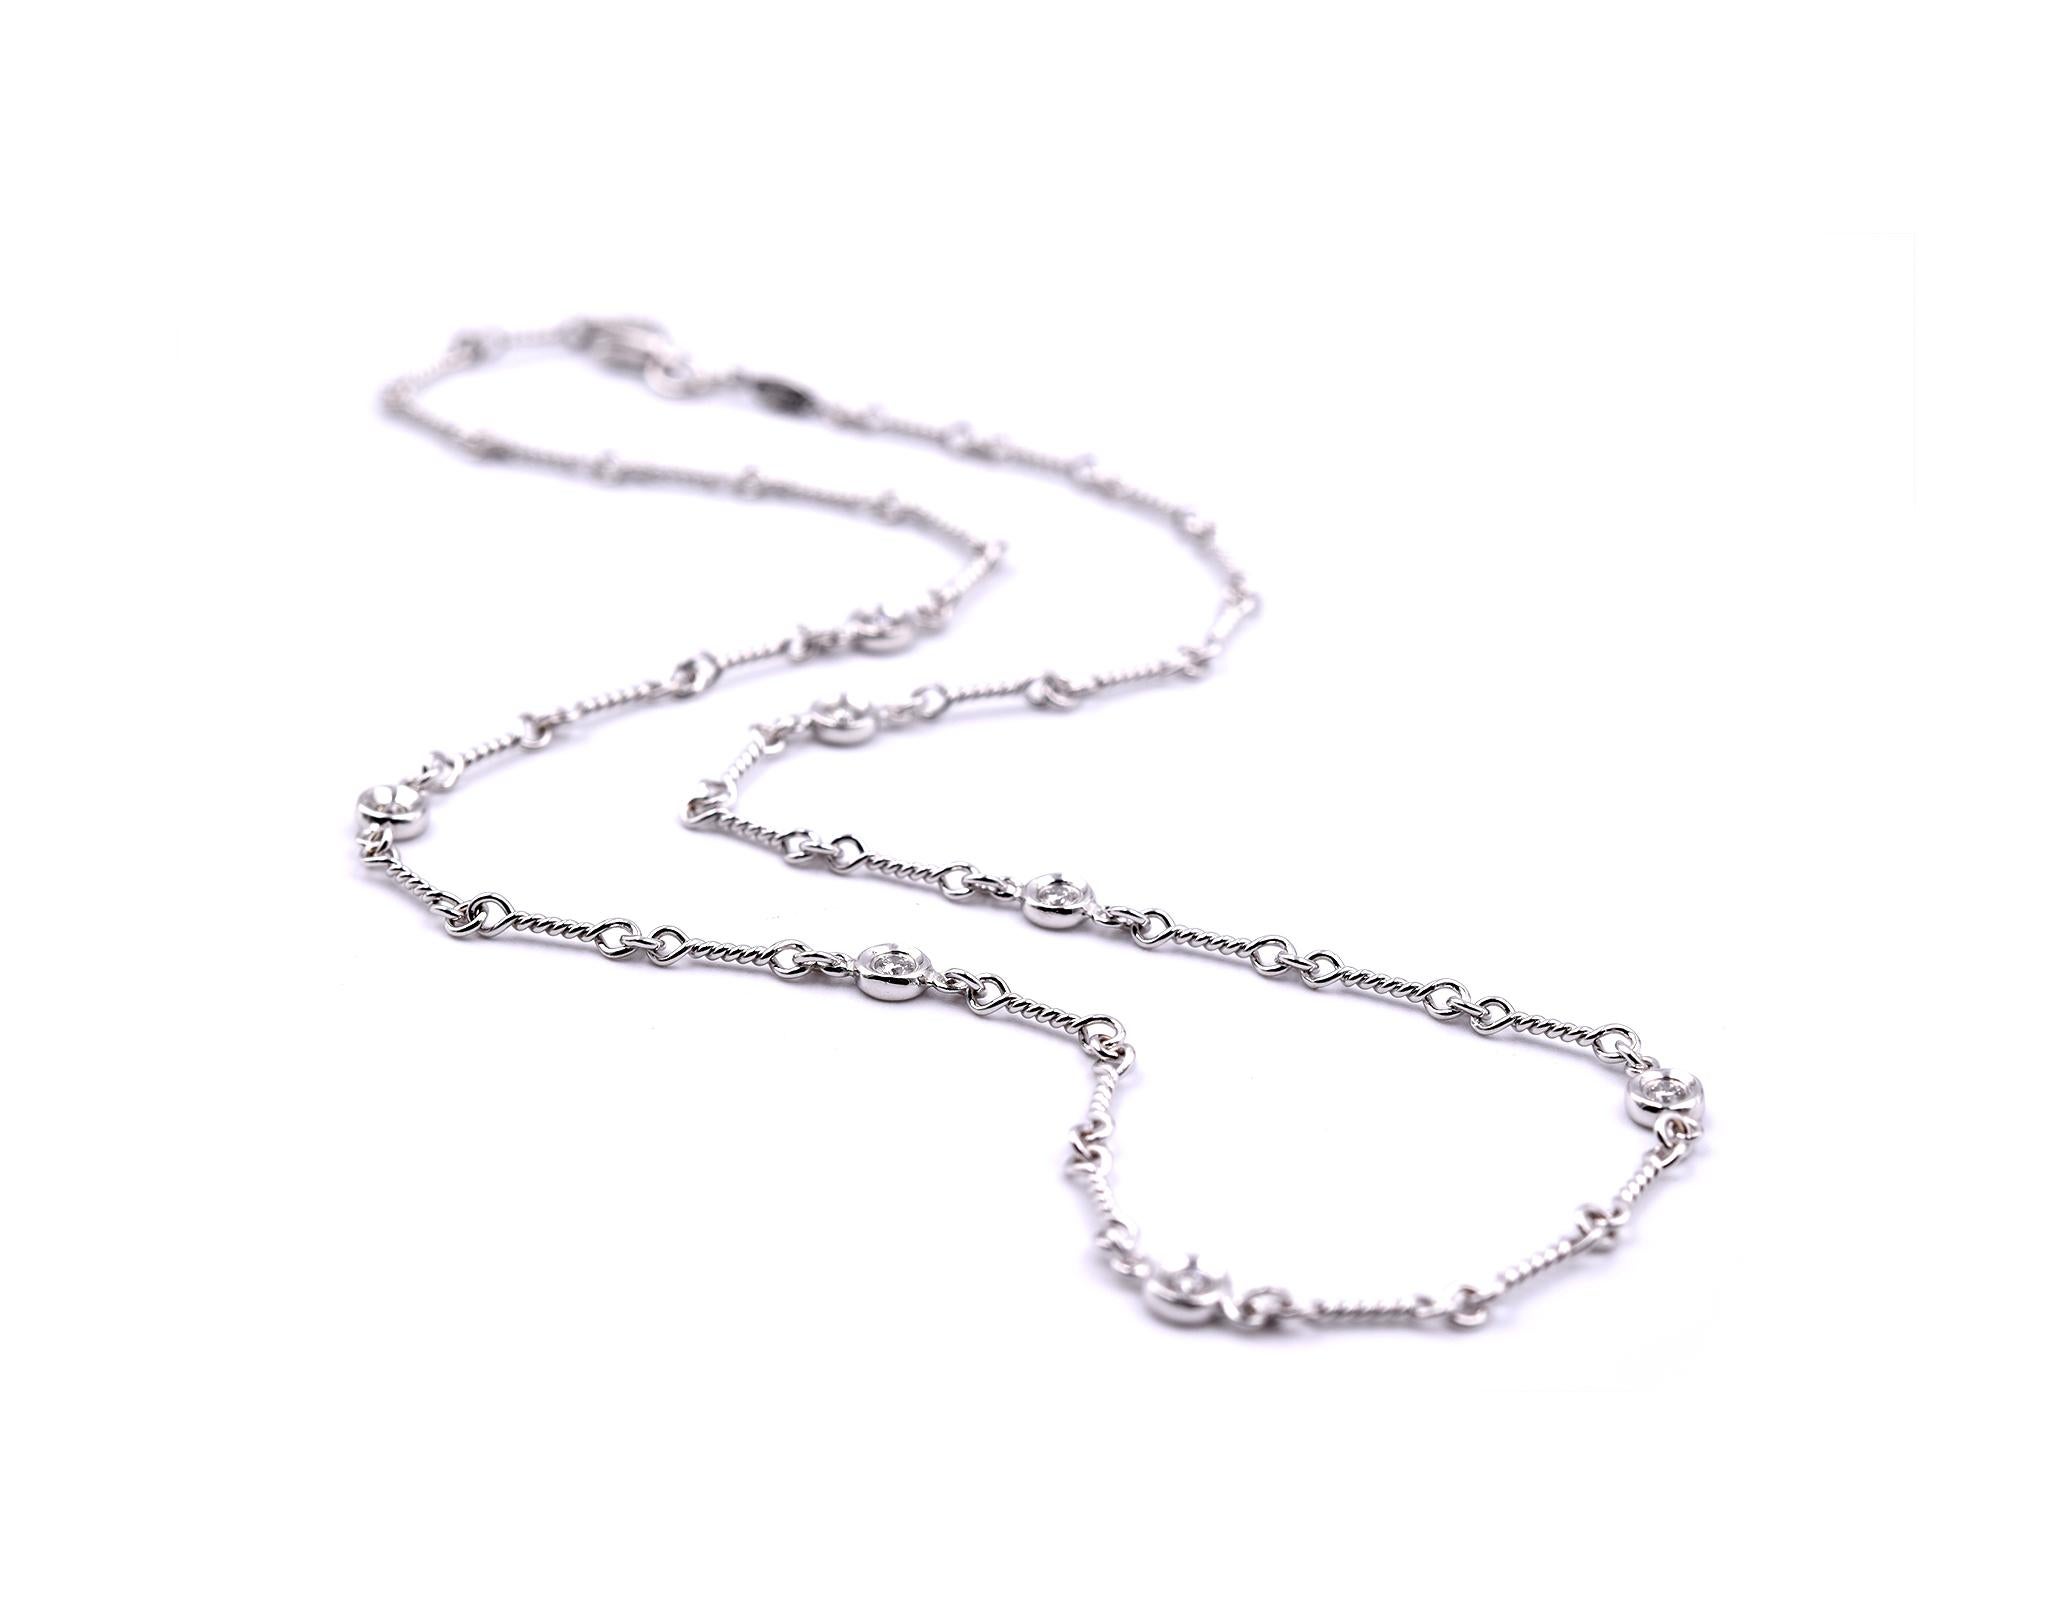 Designer: Roberto Coin Diamond by the Inch Collection
Material: 18k white gold
Diamonds: 7 round brilliant cuts = 0.28cttw
Dimensions: necklace measures 16 inches in length
Weight: 6.23 grams
Retail: $1,850
